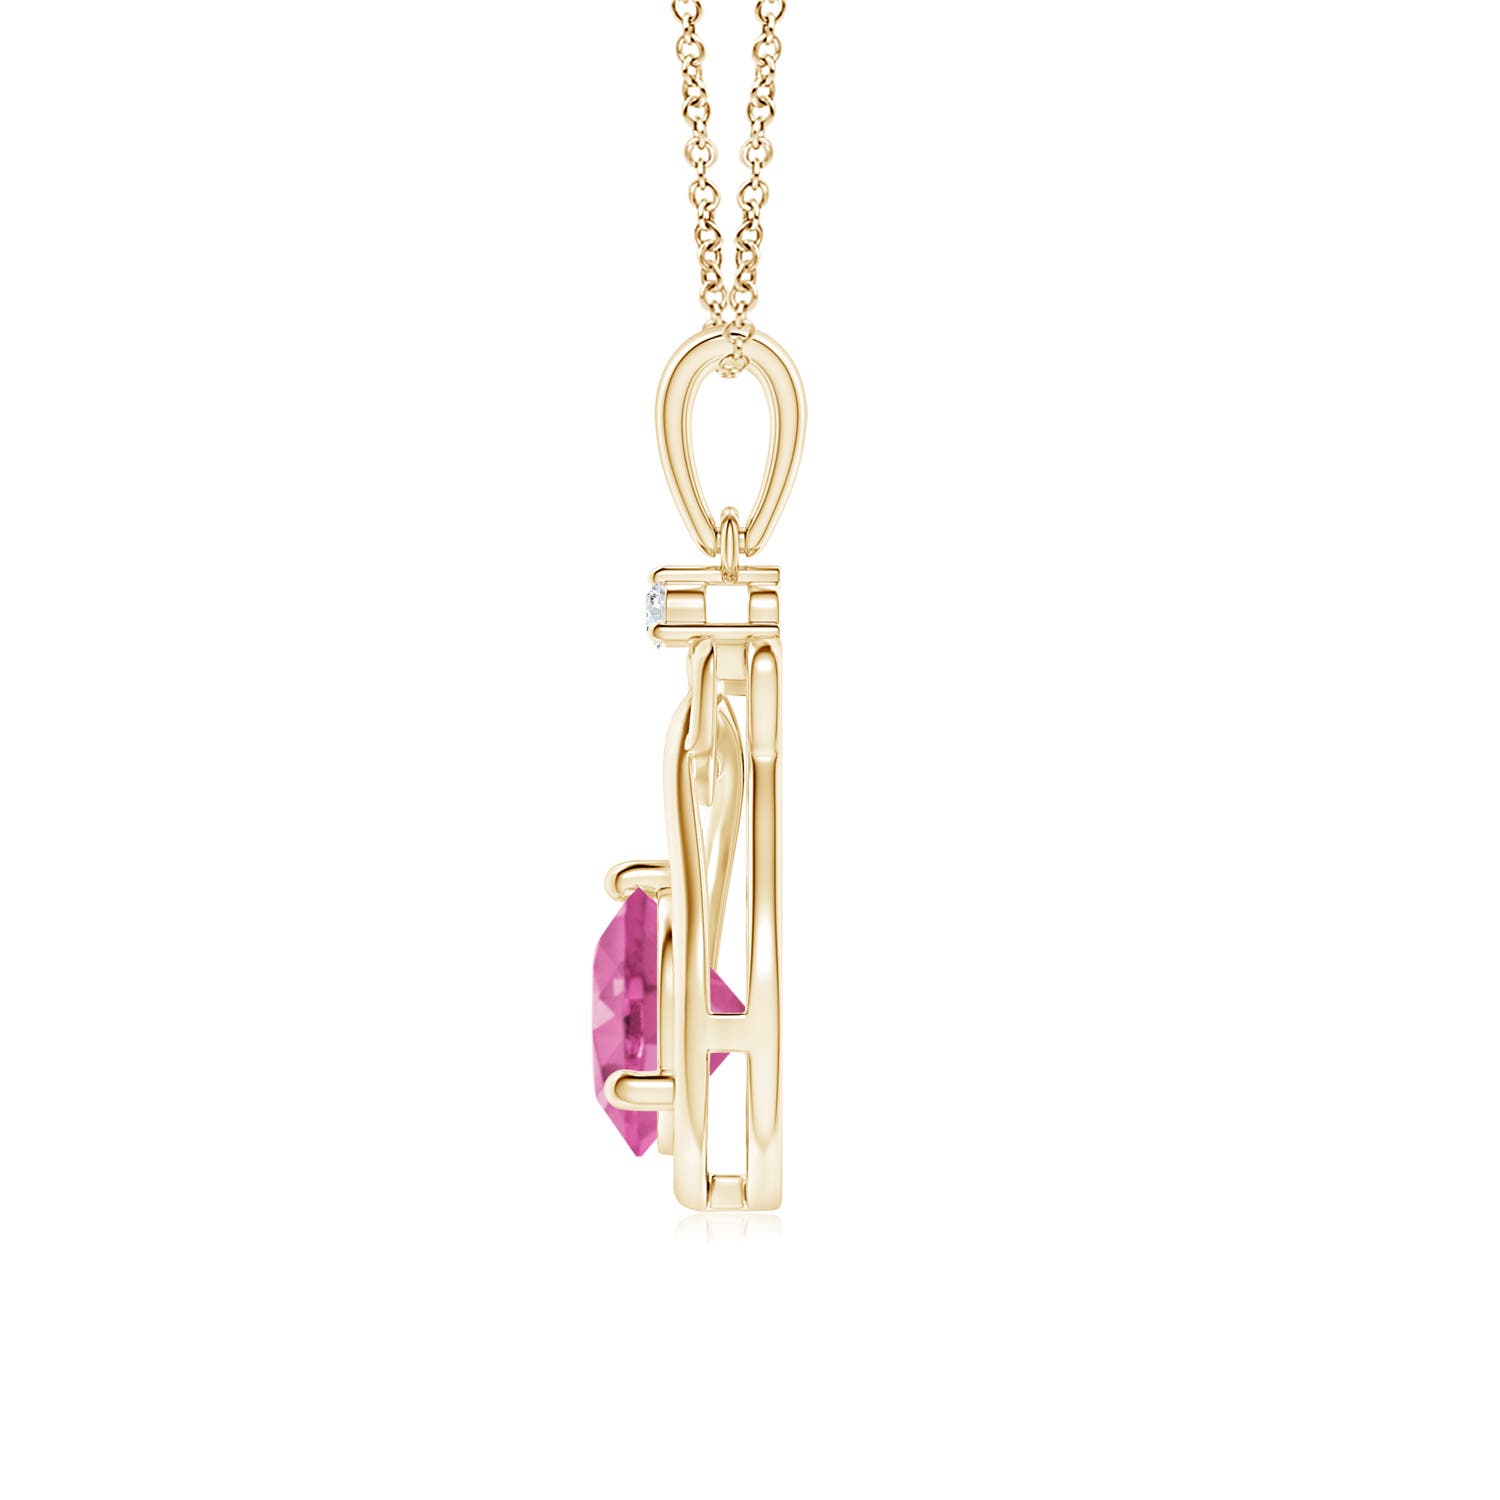 AAA - Pink Sapphire / 1.01 CT / 14 KT Yellow Gold